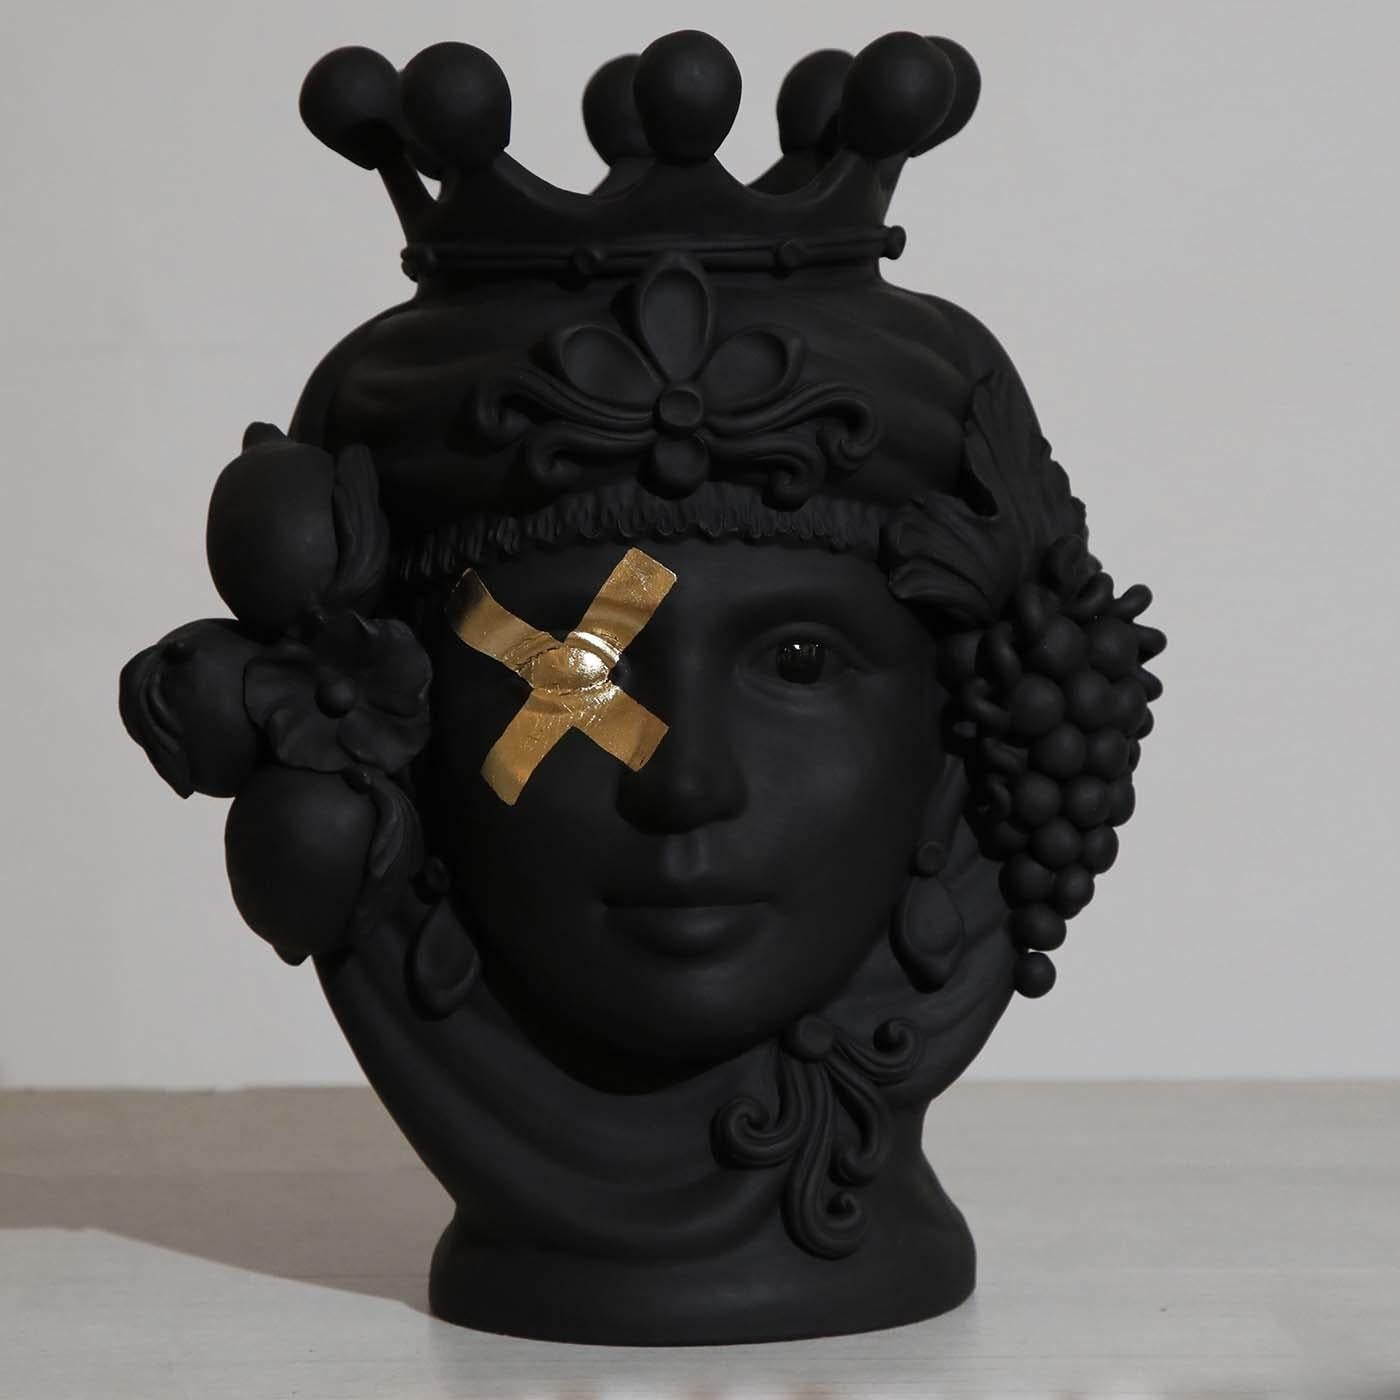 Skillfully handmade by sculptor Stefania Boemi, this anthropomorphic vase of a woman is a striking homage to Sicily's rich cultural traditions. The subject is drawn from Sicilian lore, a story of love and revenge between a Moor and a maiden dating